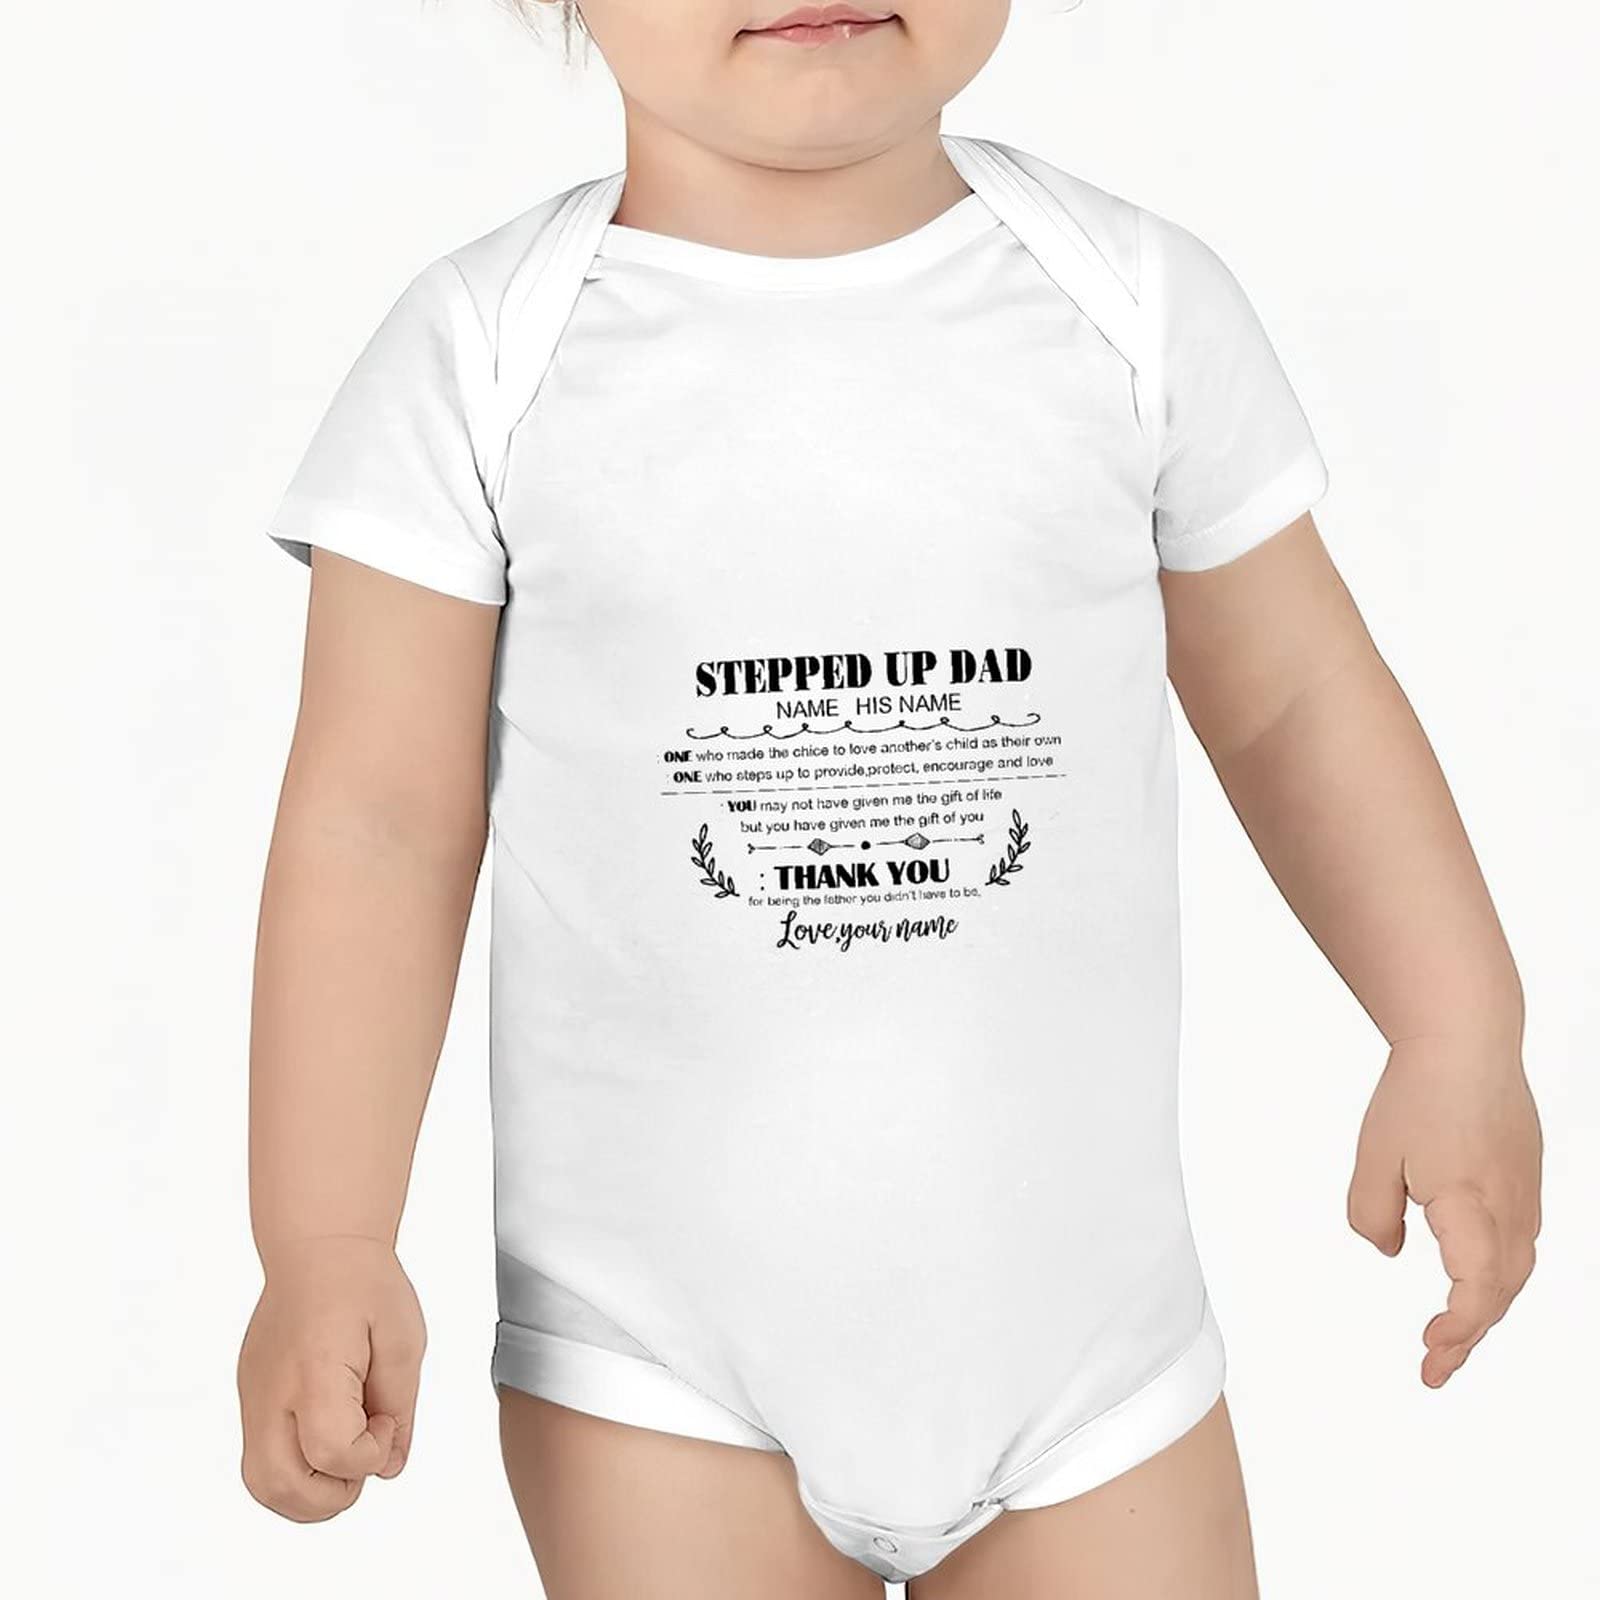 Baby Bodysuits Cotton Sleep And Play Flexible For Newborn Baby Boy Girl Infant One-Piece Short-Sleeve Gender Reveal Gifts